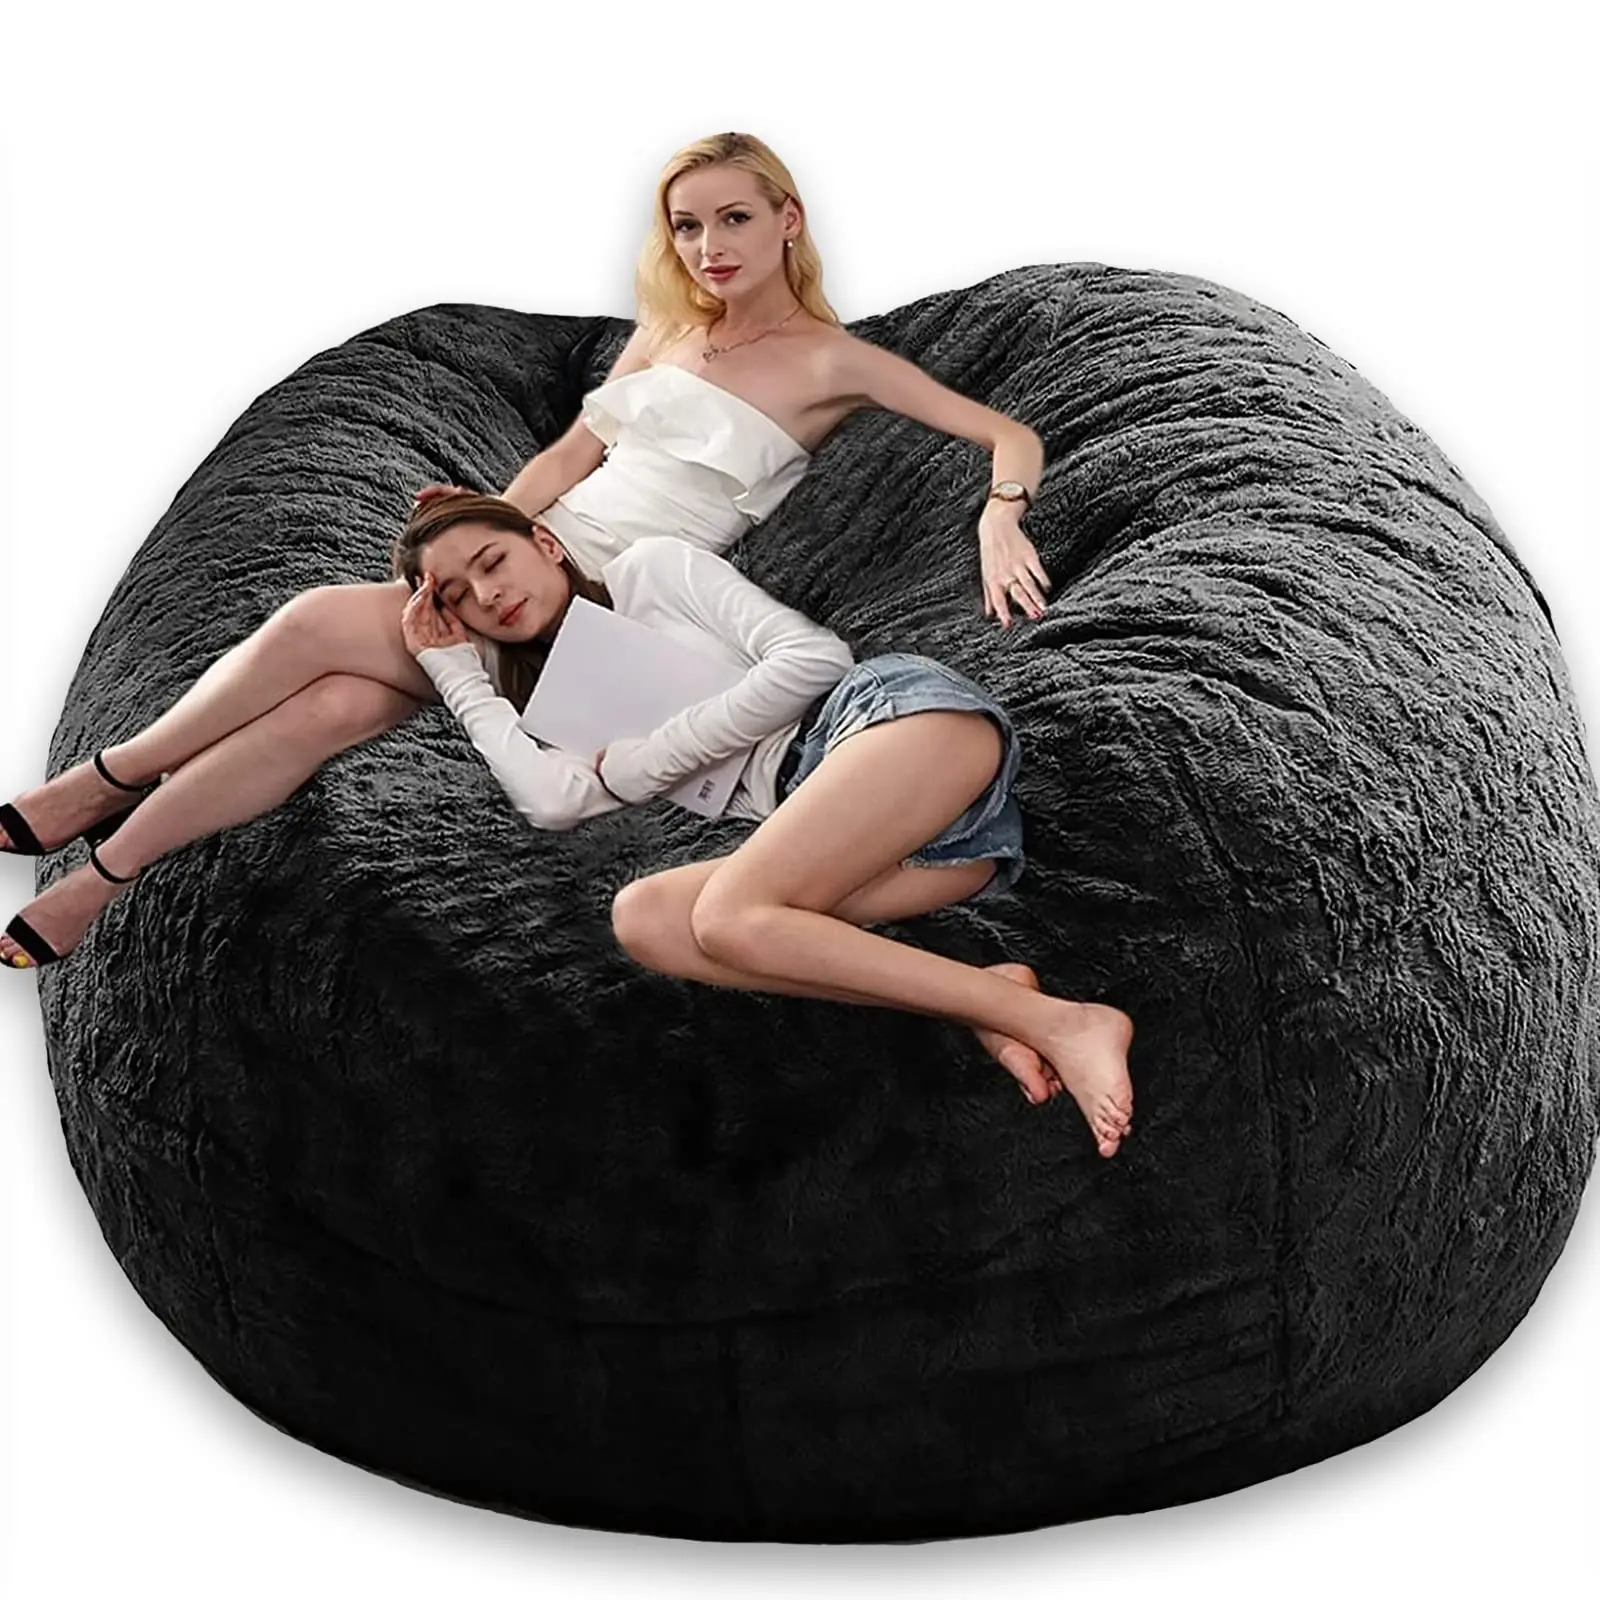 New giant sofa cover soft  Bean Bag Chairs Giant Bean Bag Chair Big Bean Bag Cover Comfy Bean Bag Bed Fluffy Lazy Sofa